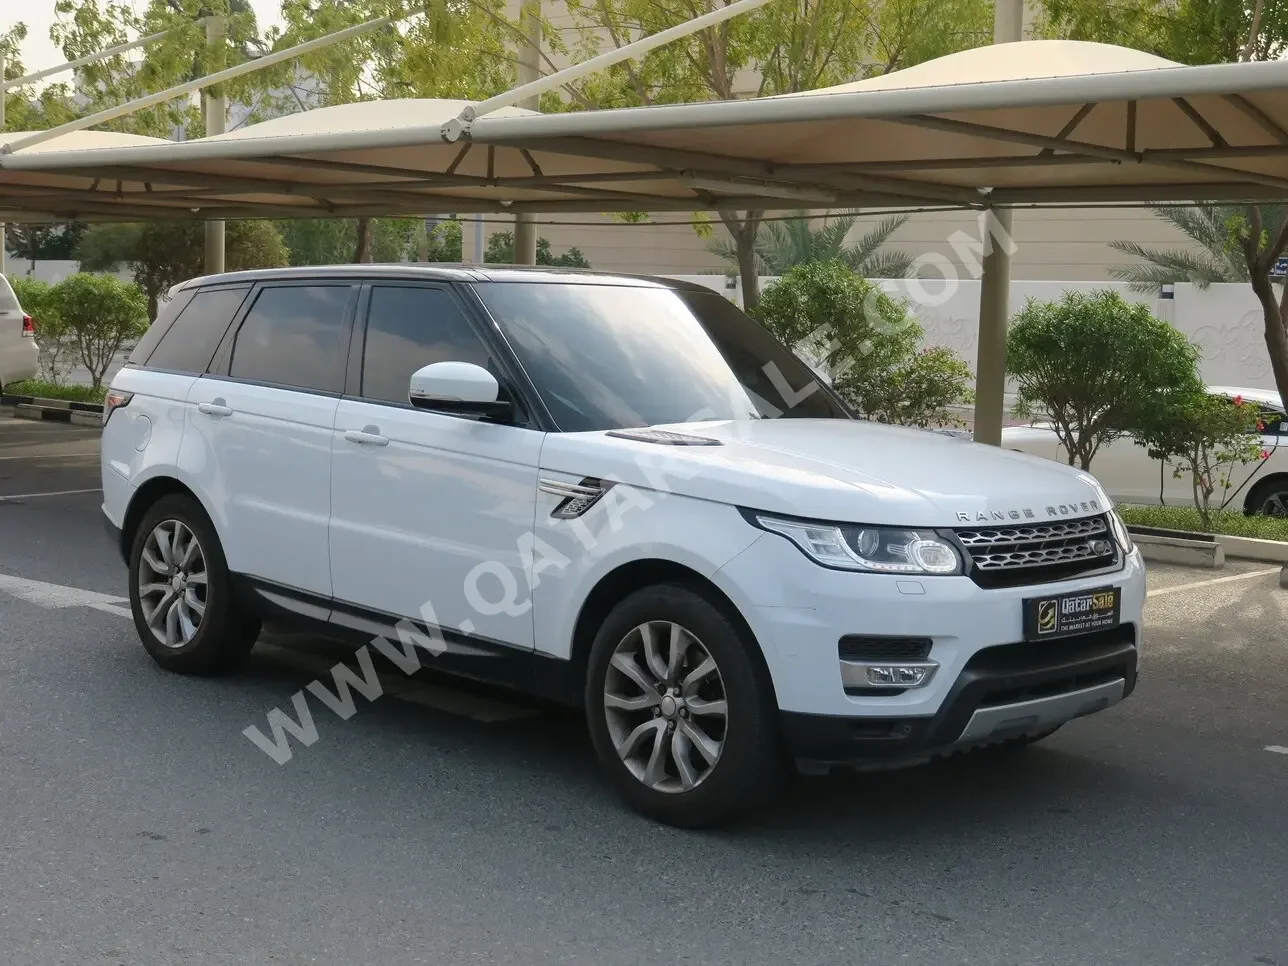 Land Rover  Range Rover  Sport Super charged  2014  Automatic  163,000 Km  6 Cylinder  Four Wheel Drive (4WD)  SUV  White